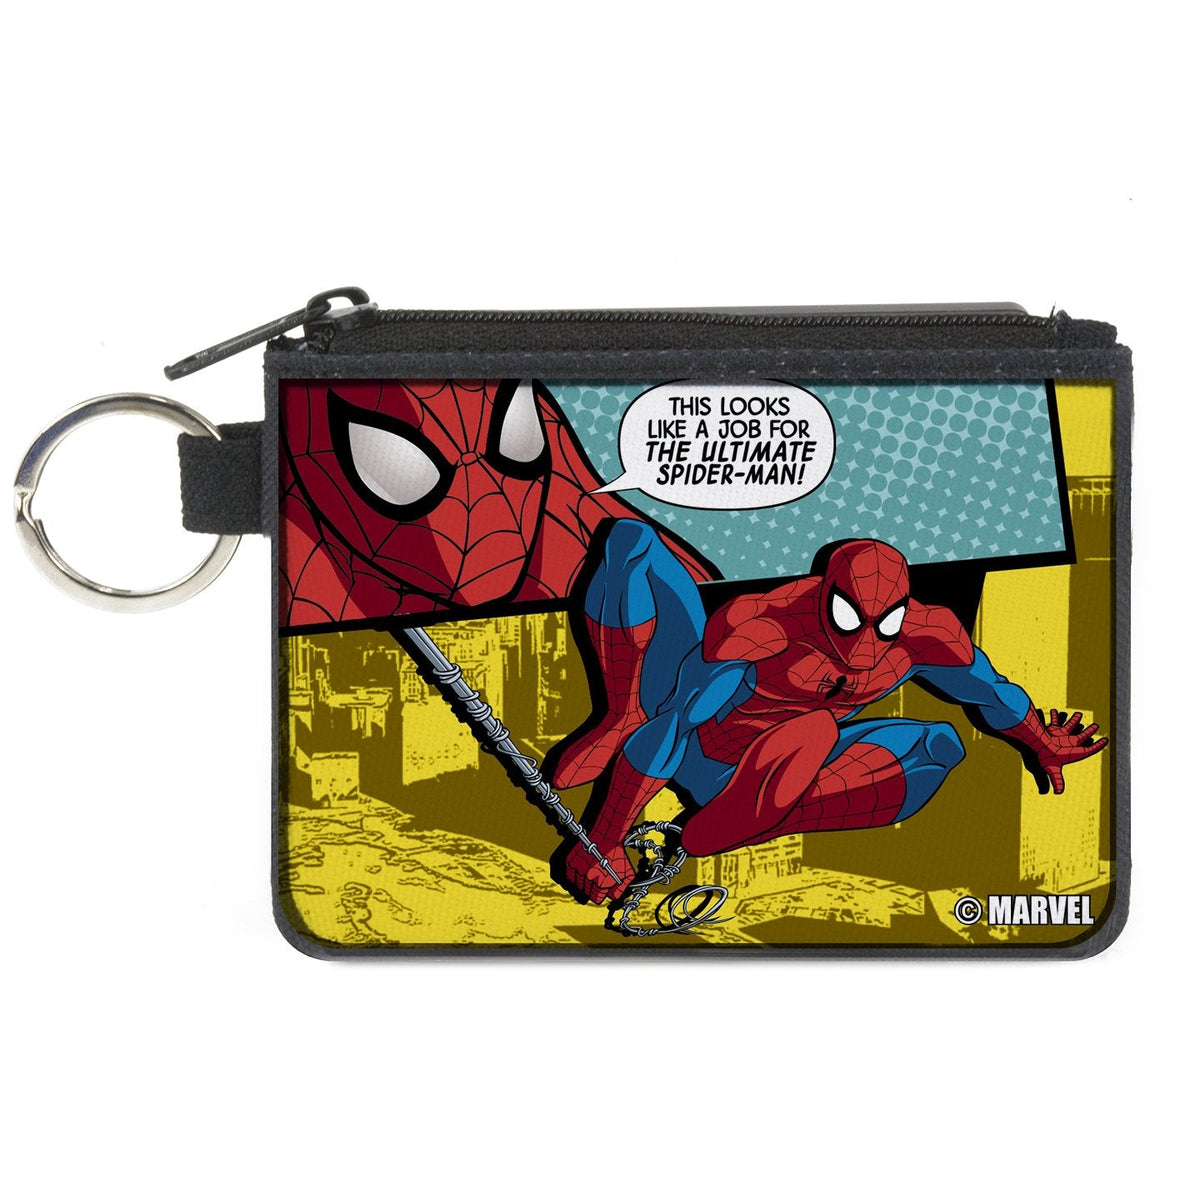 MARVEL UNIVERSE  
Canvas Zipper Wallet - MINI X-SMALL - Spider-Man Face/Action Pose Quote Bubble THIS LOOKS LIKE A JOB FOR THE ULTIMATE SPIDER-MAN! Teals/Yellows